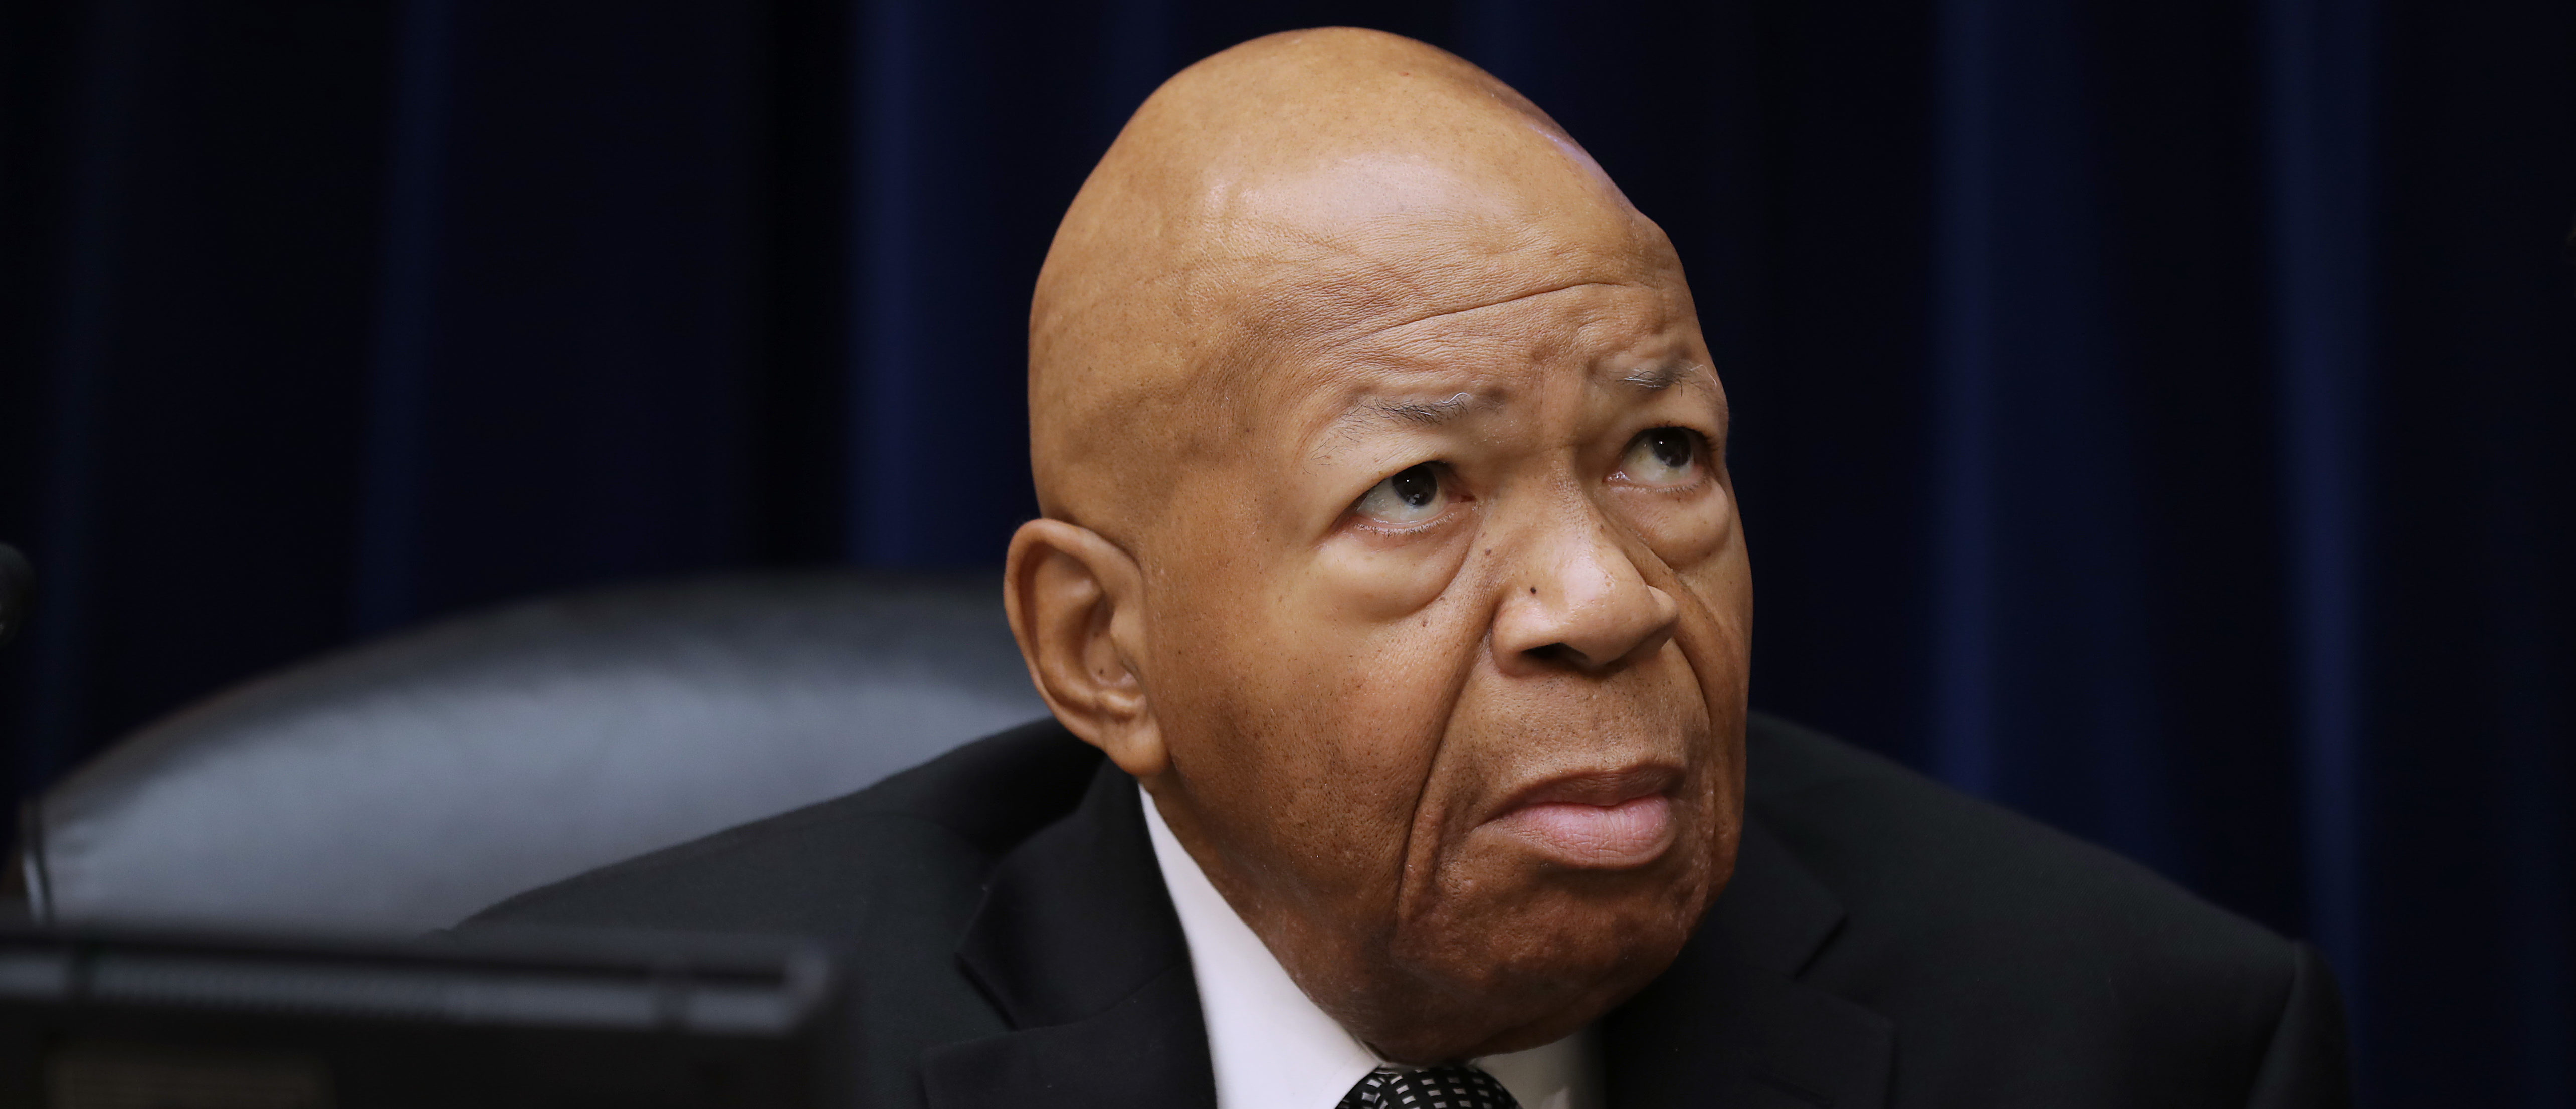 House Oversight and Government Reform Committee Chairman Elijah Cummings (D-MD) prepares for a hearing on drug pricing in the Rayburn House Office building on Capitol Hill July 26, 2019 in Washington, DC. (Chip Somodevilla/Getty Images)